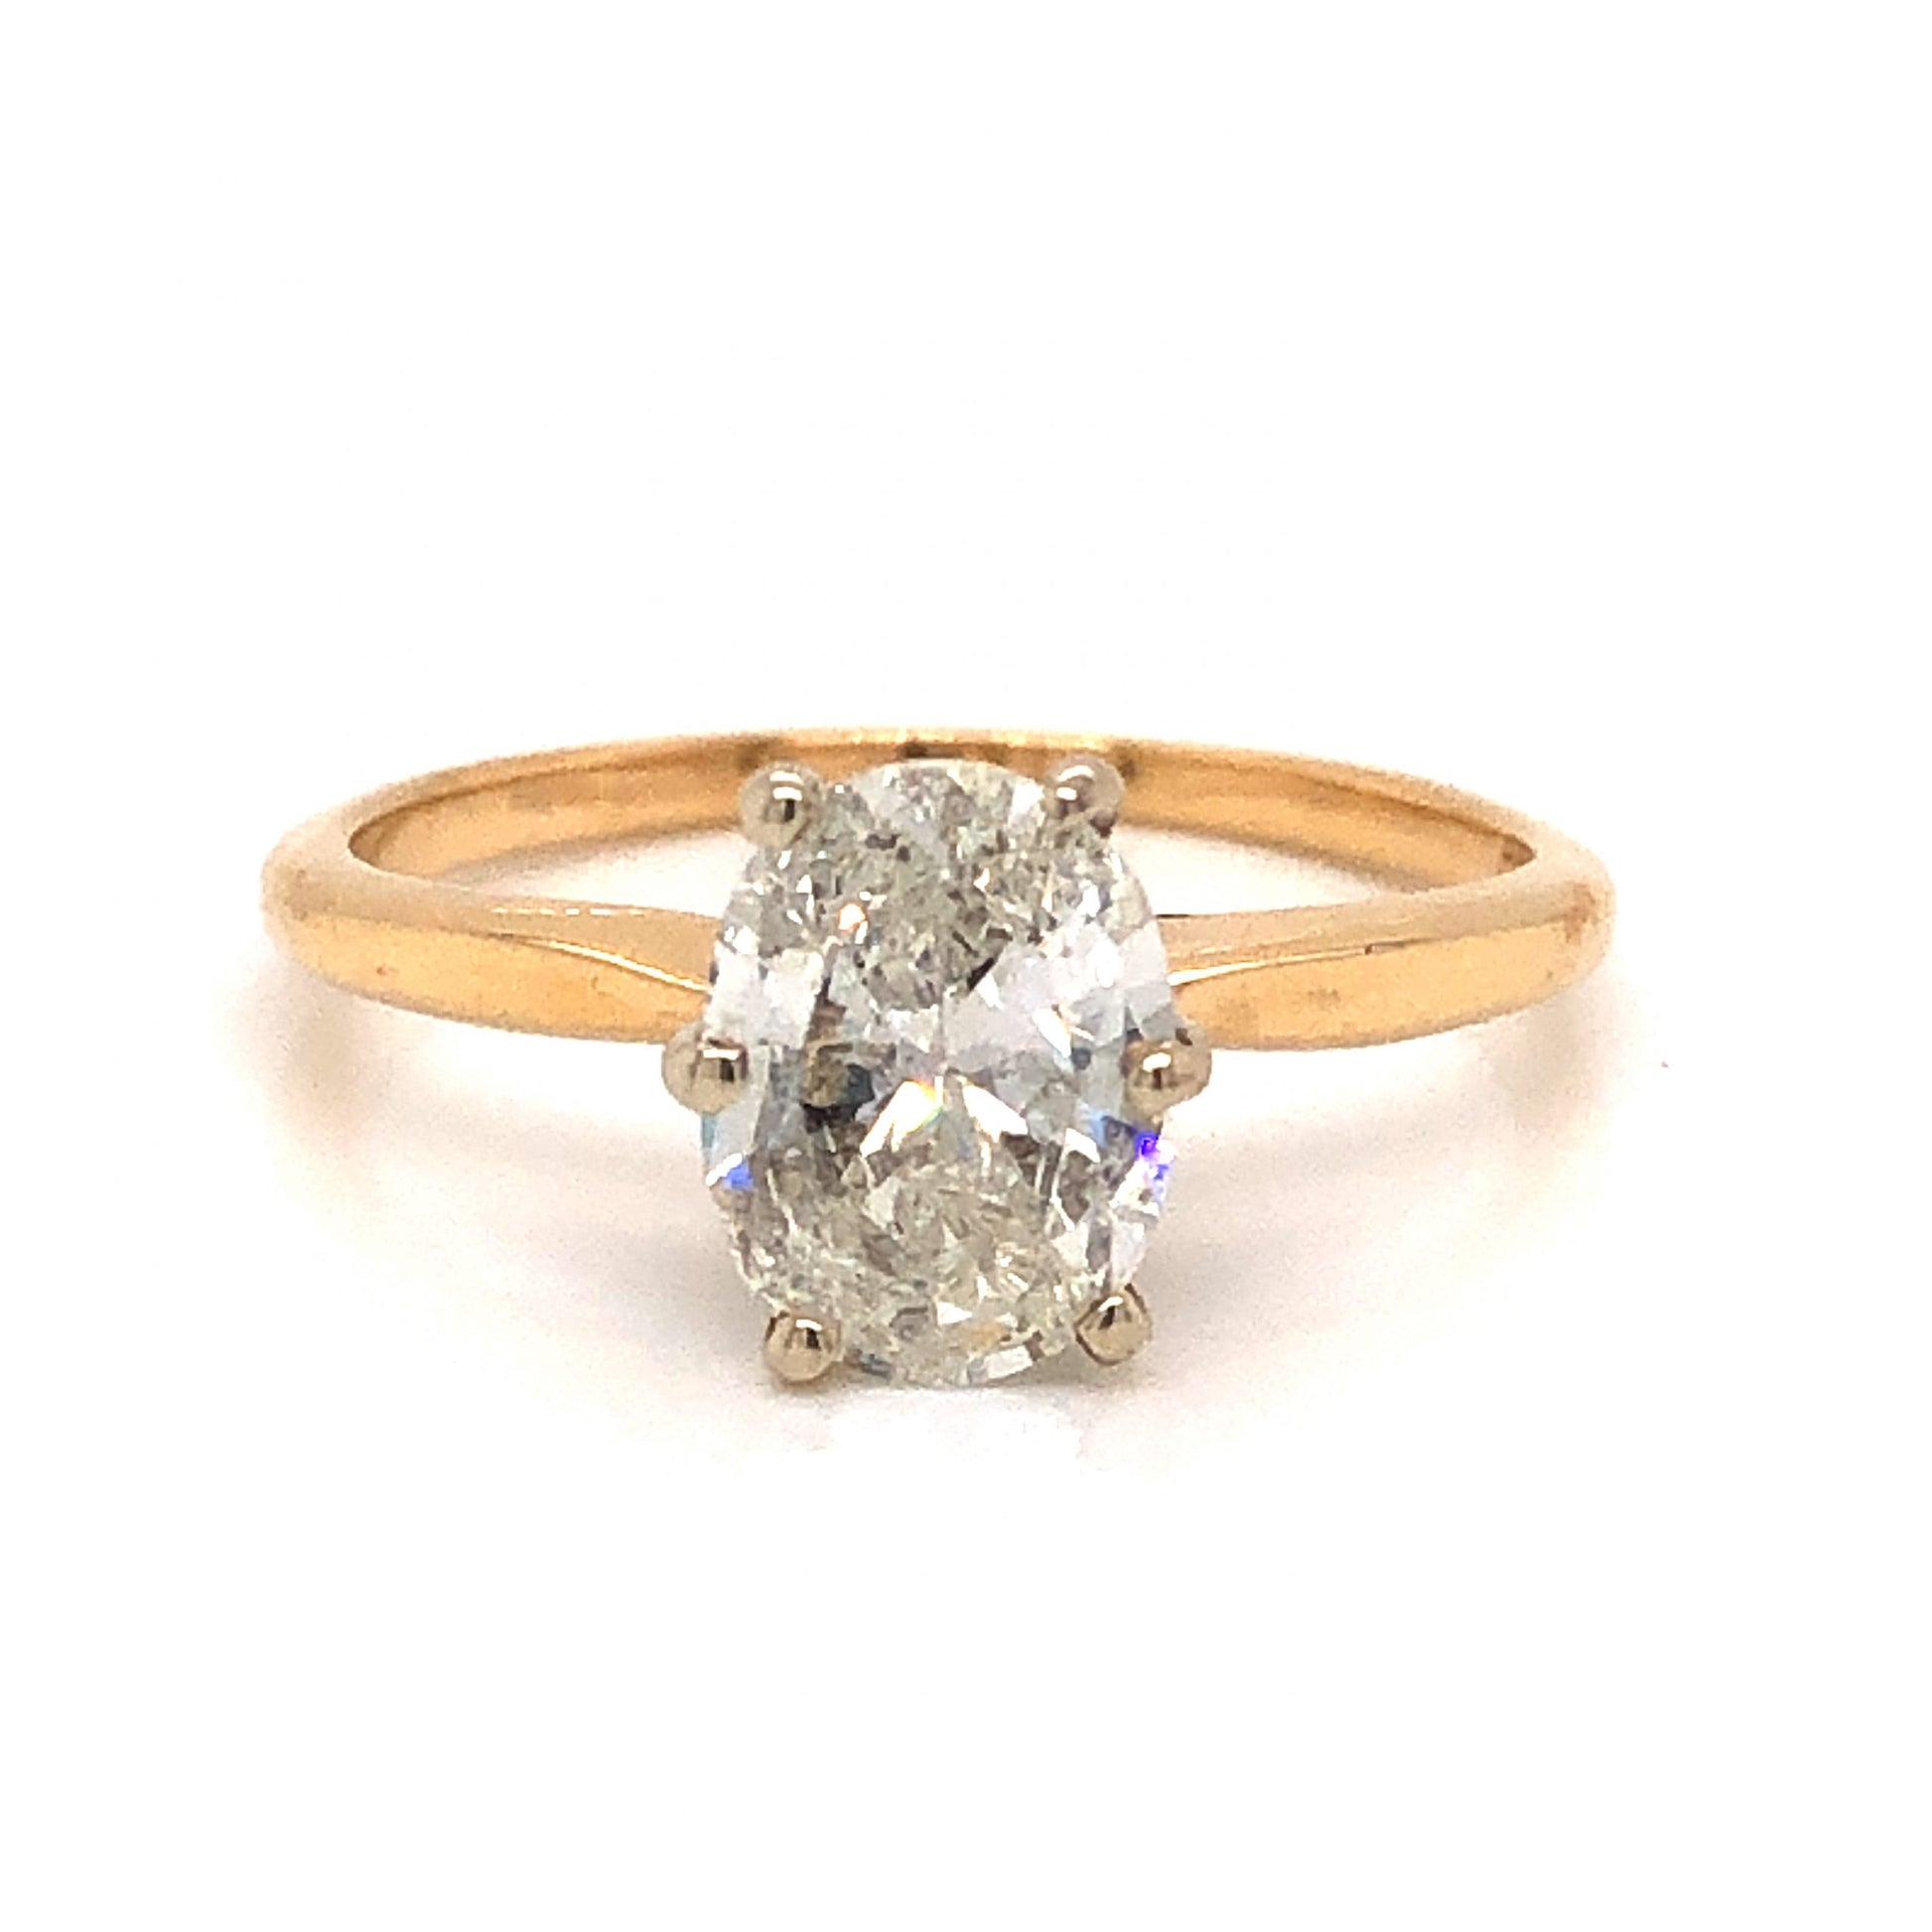 1.01 Oval Cut Diamond Engagement Ring in 14k Yellow GoldComposition: 14 Karat Yellow GoldRing Size: 6Total Diamond Weight: 1.01 ctTotal Gram Weight: 2.1 gInscription: 14k 101